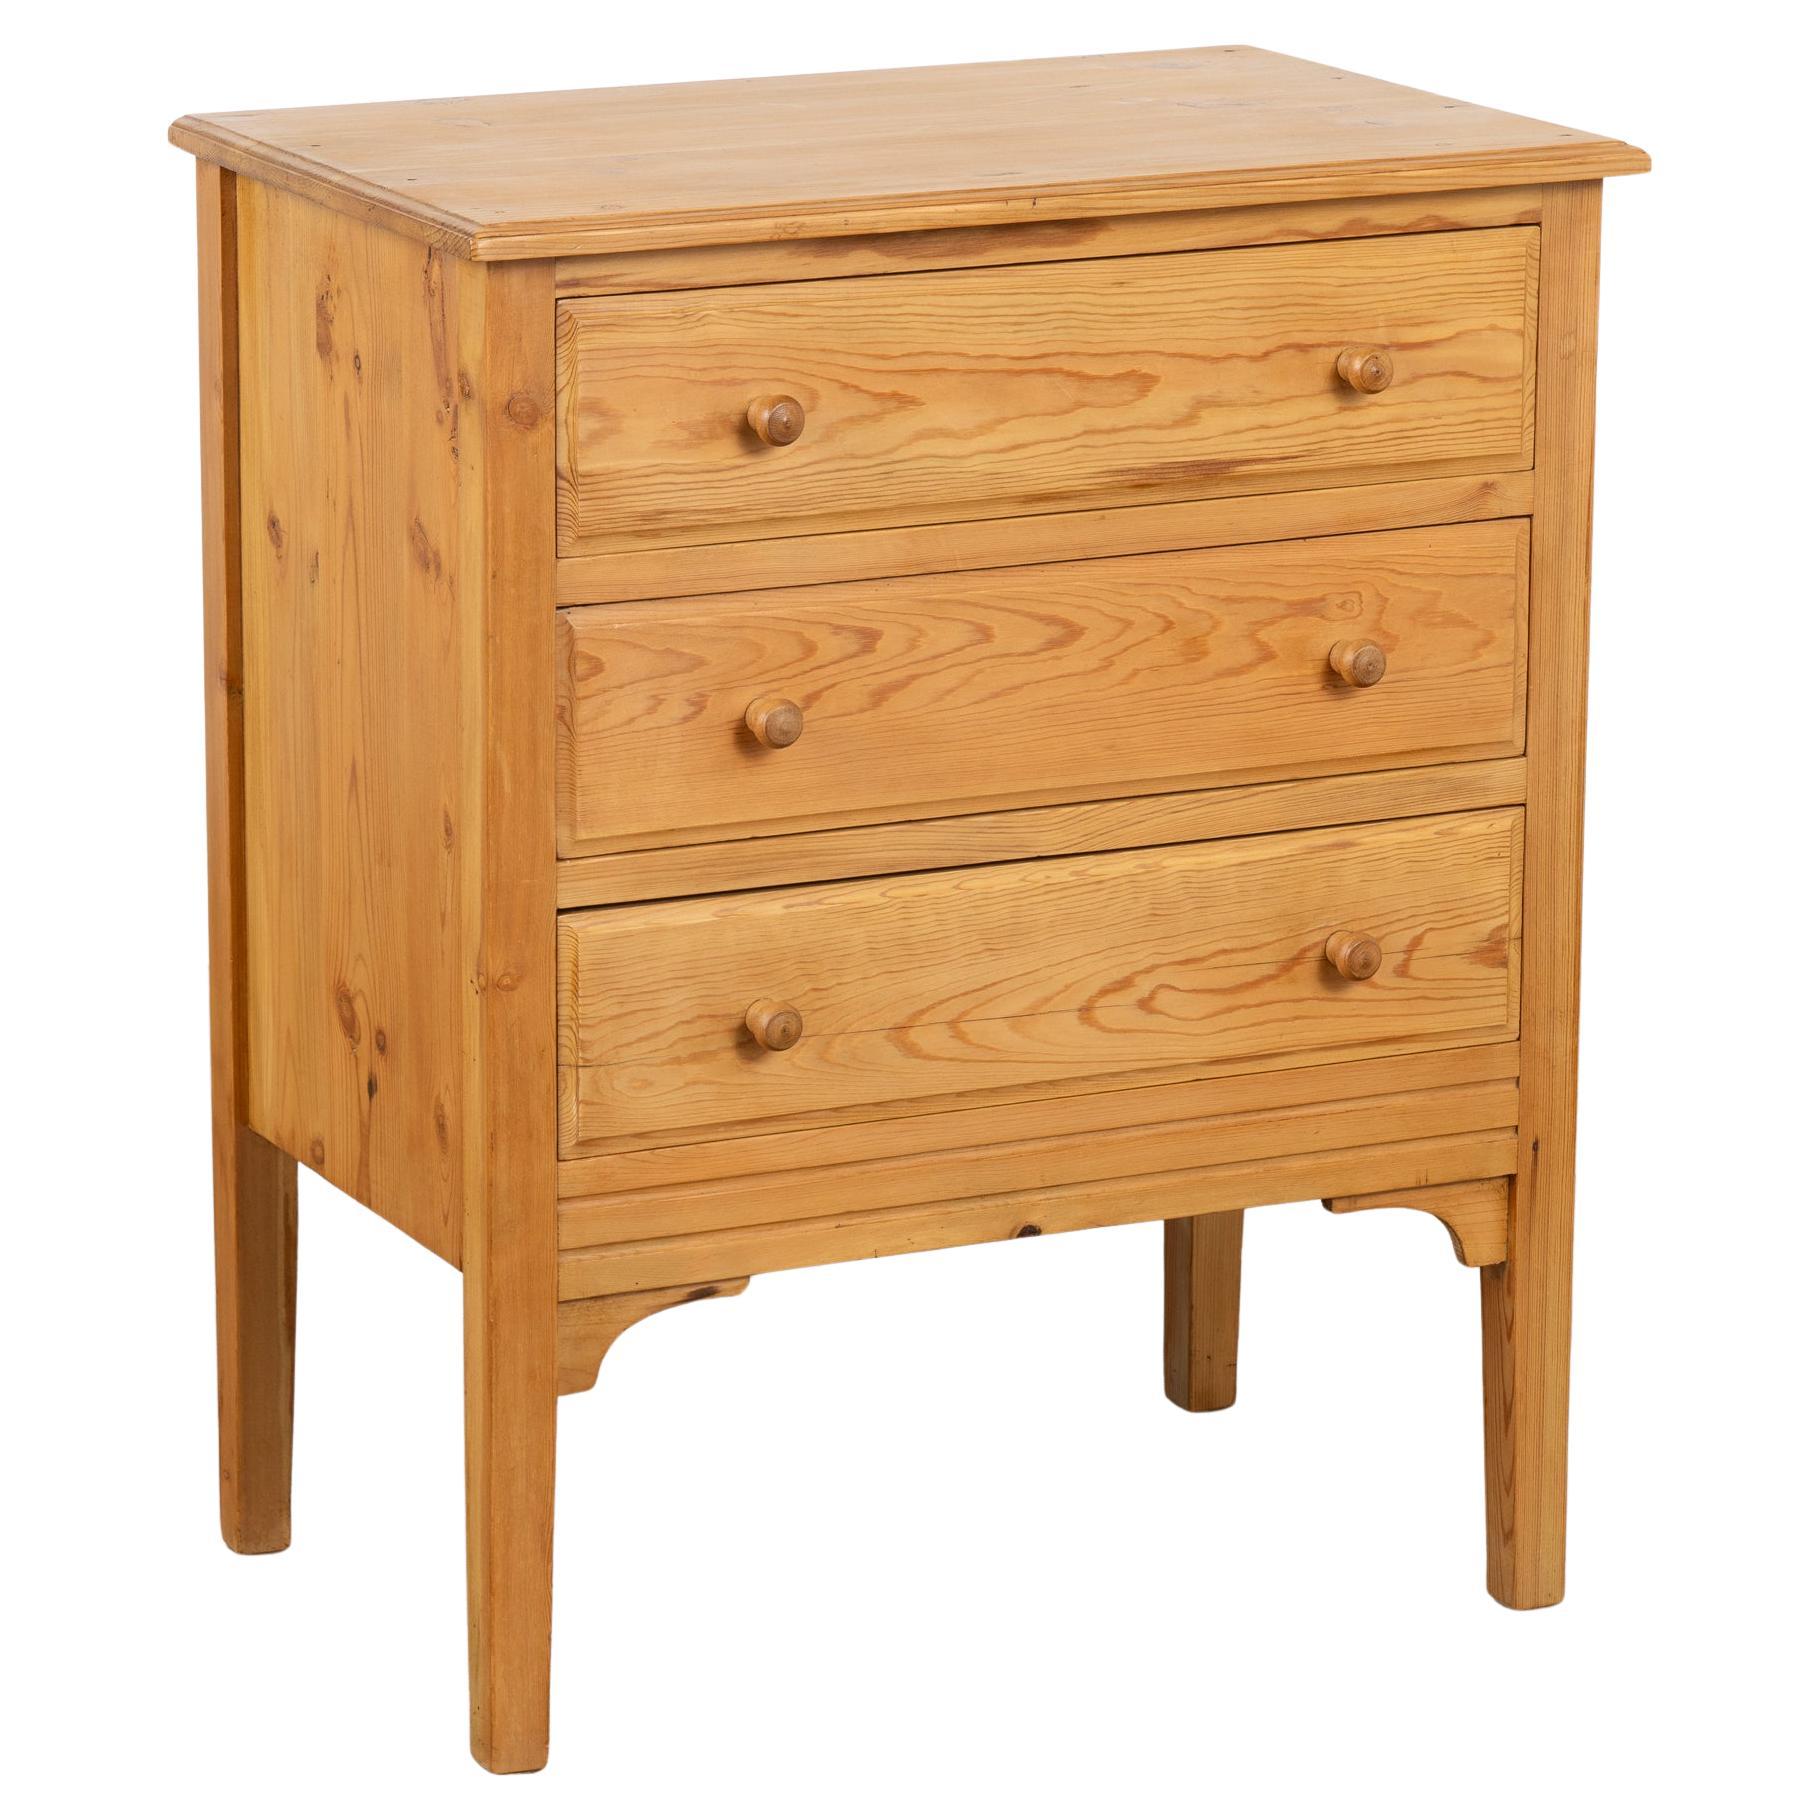 Vintage Pine Small Chest of Drawers Nightstand, Denmark circa 1940 For Sale